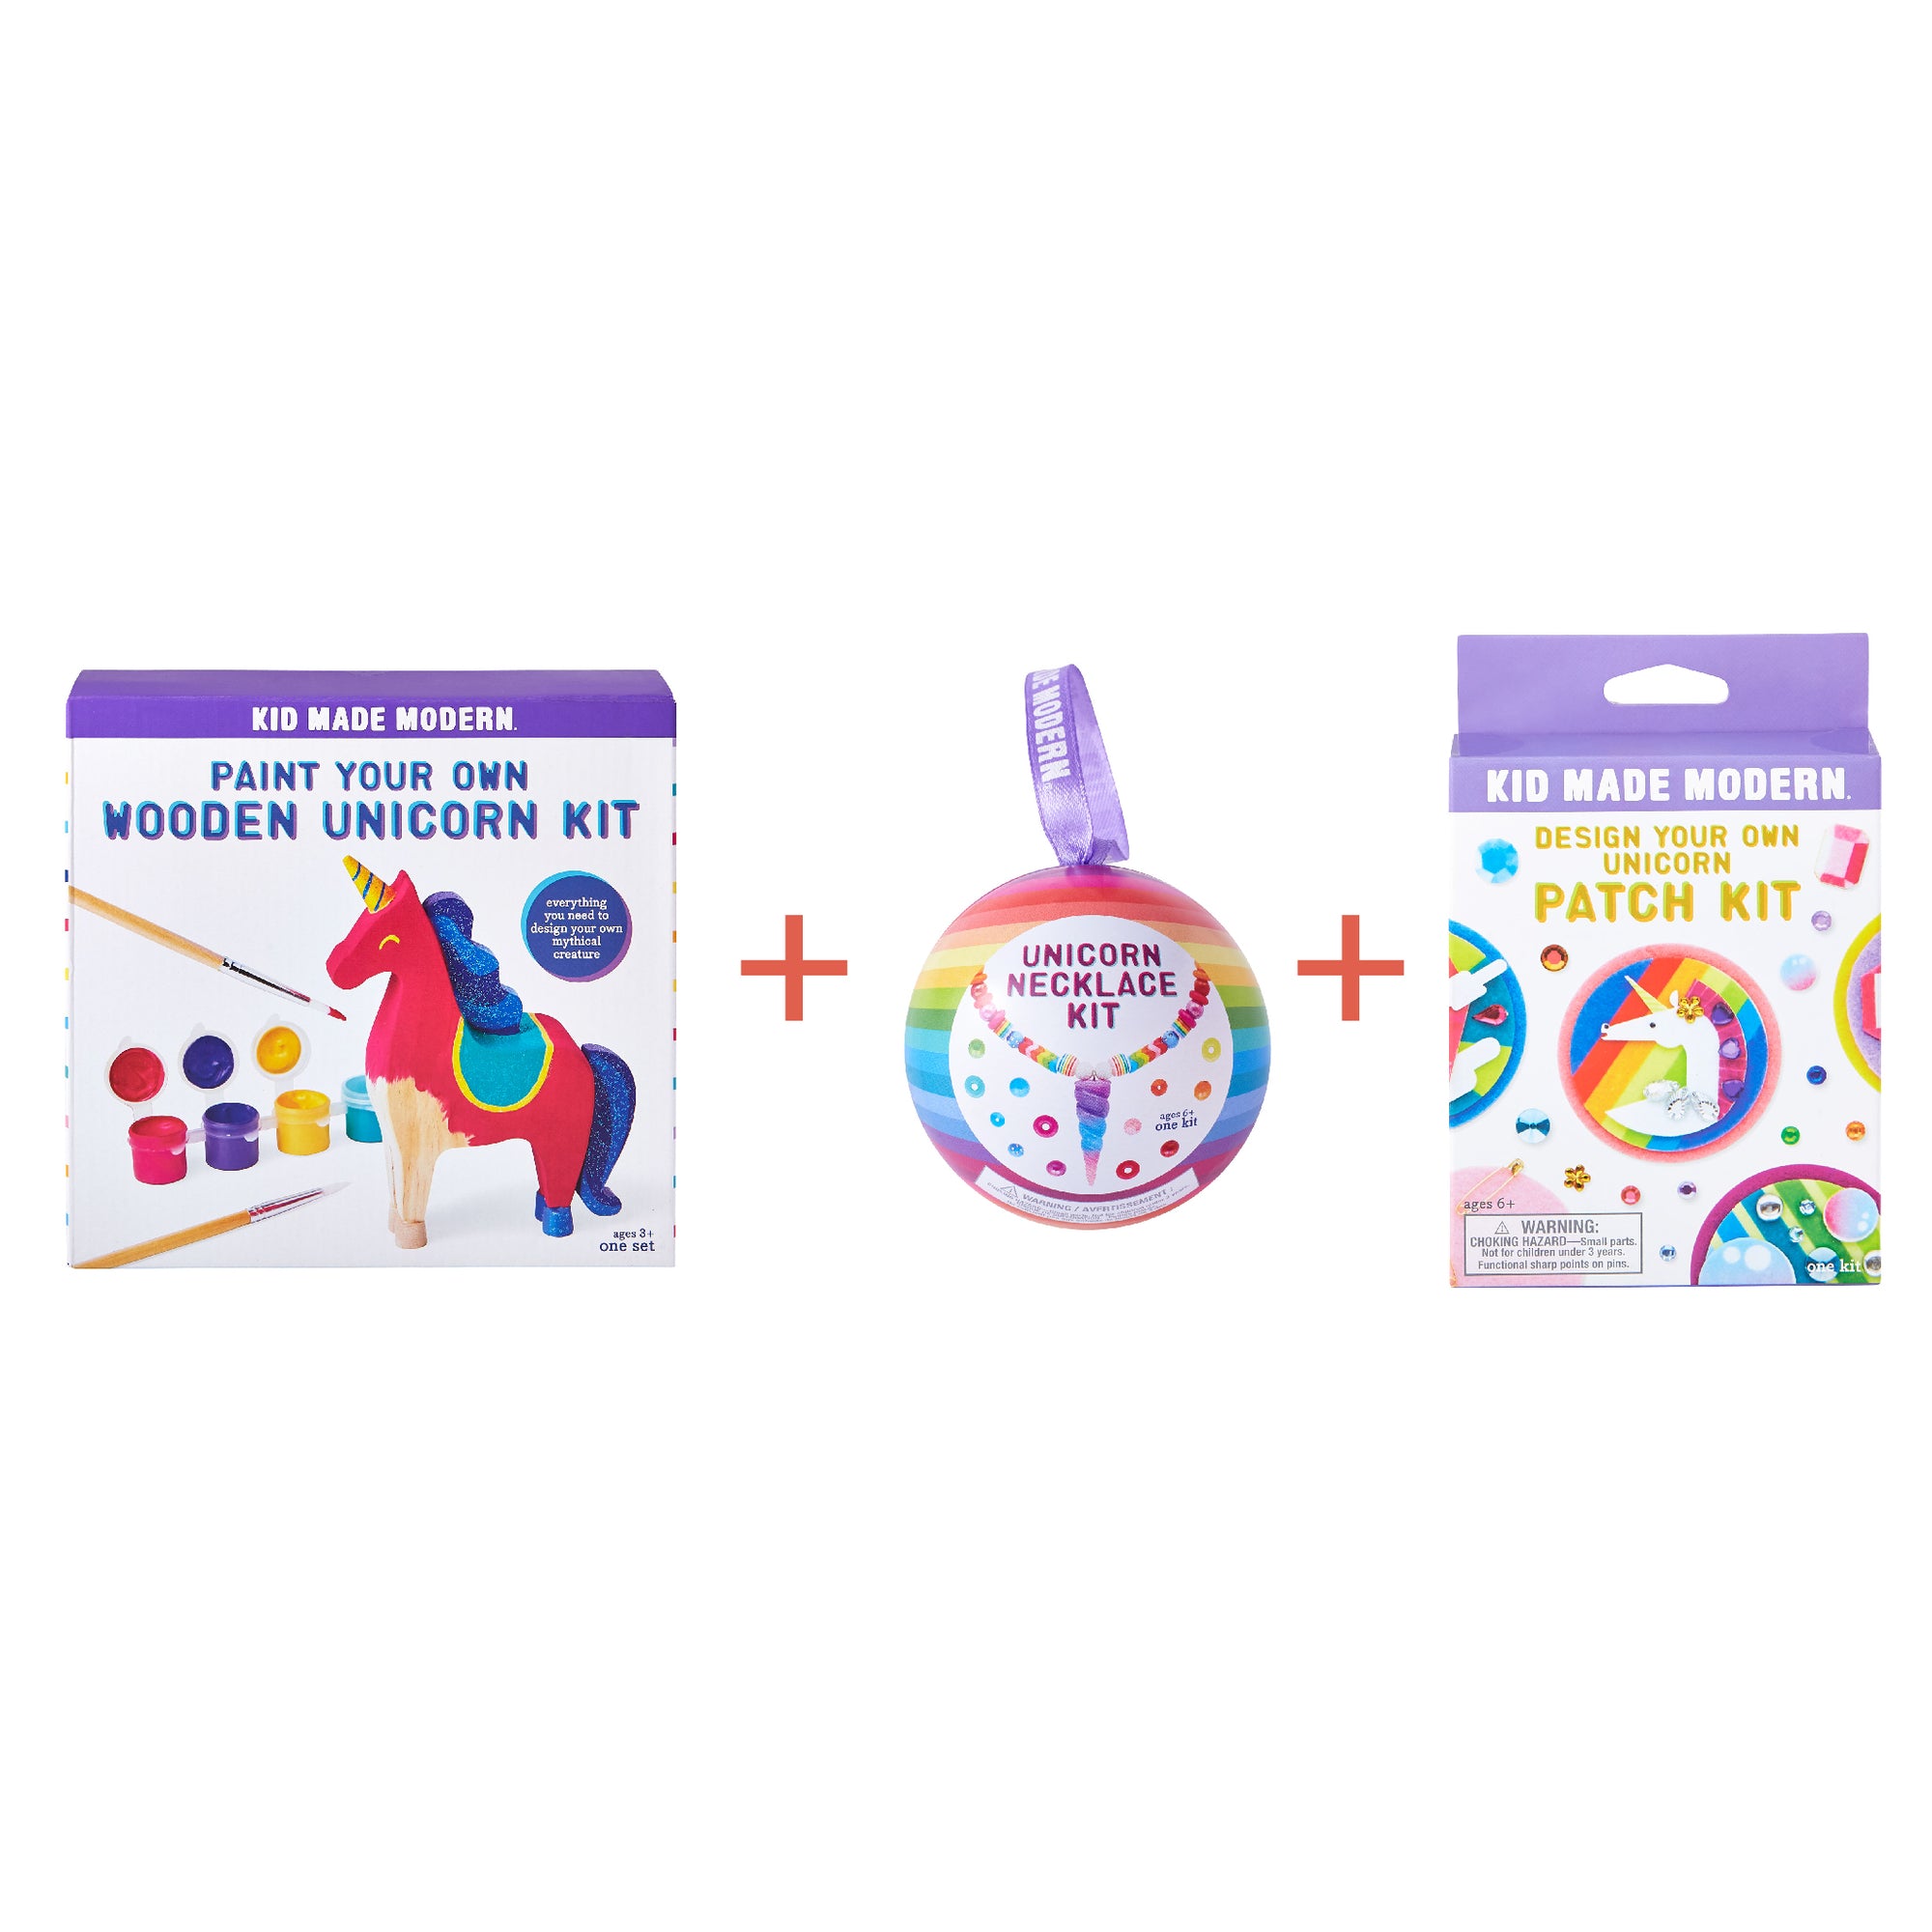 Paint Your Own Wooden Unicorn Kit + Design Your Own Unicorn Patch Kit